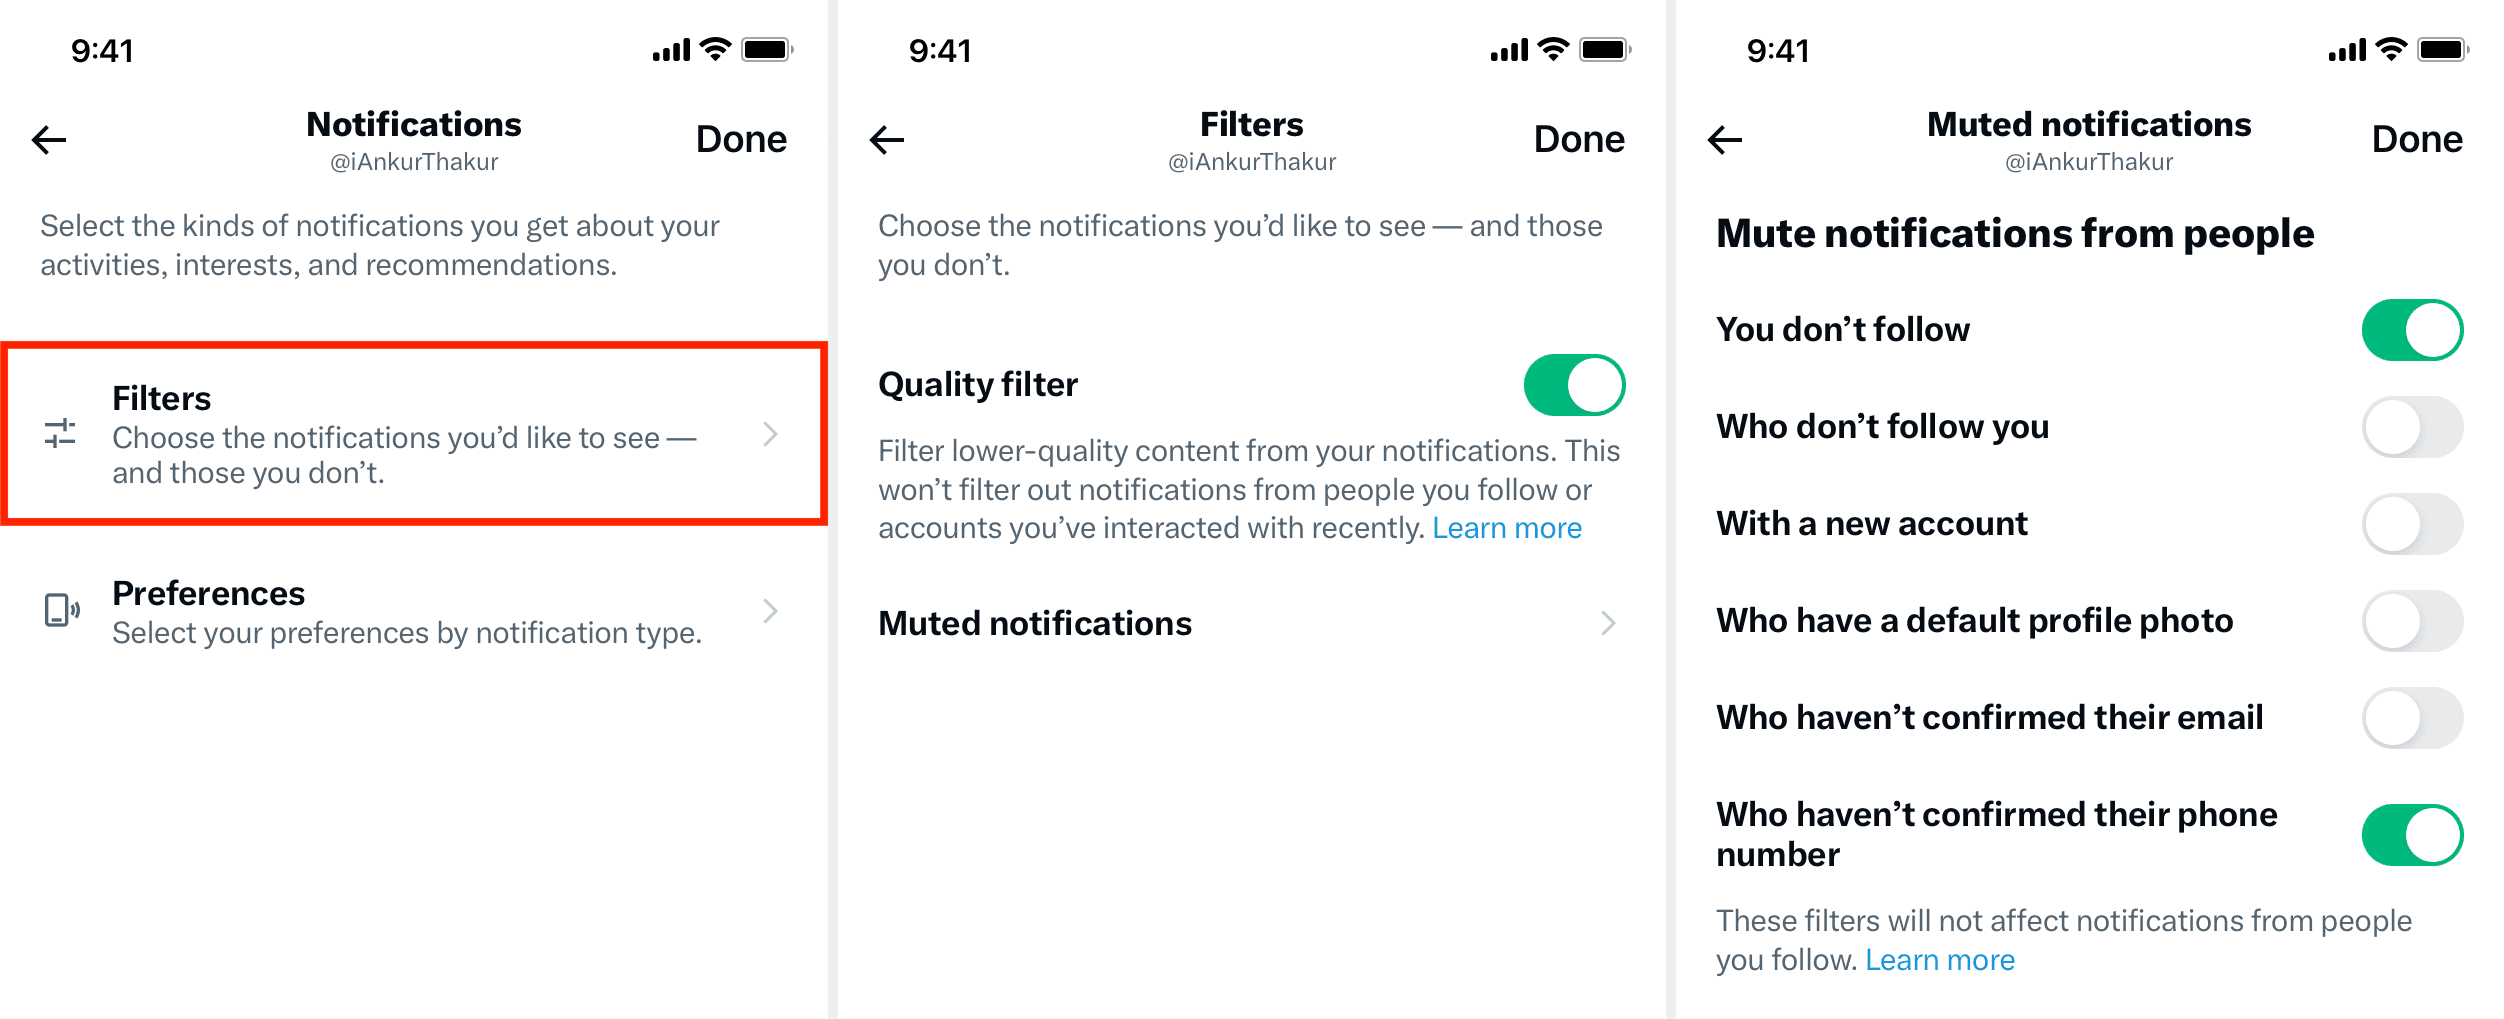 Filter notifications option in Twitter